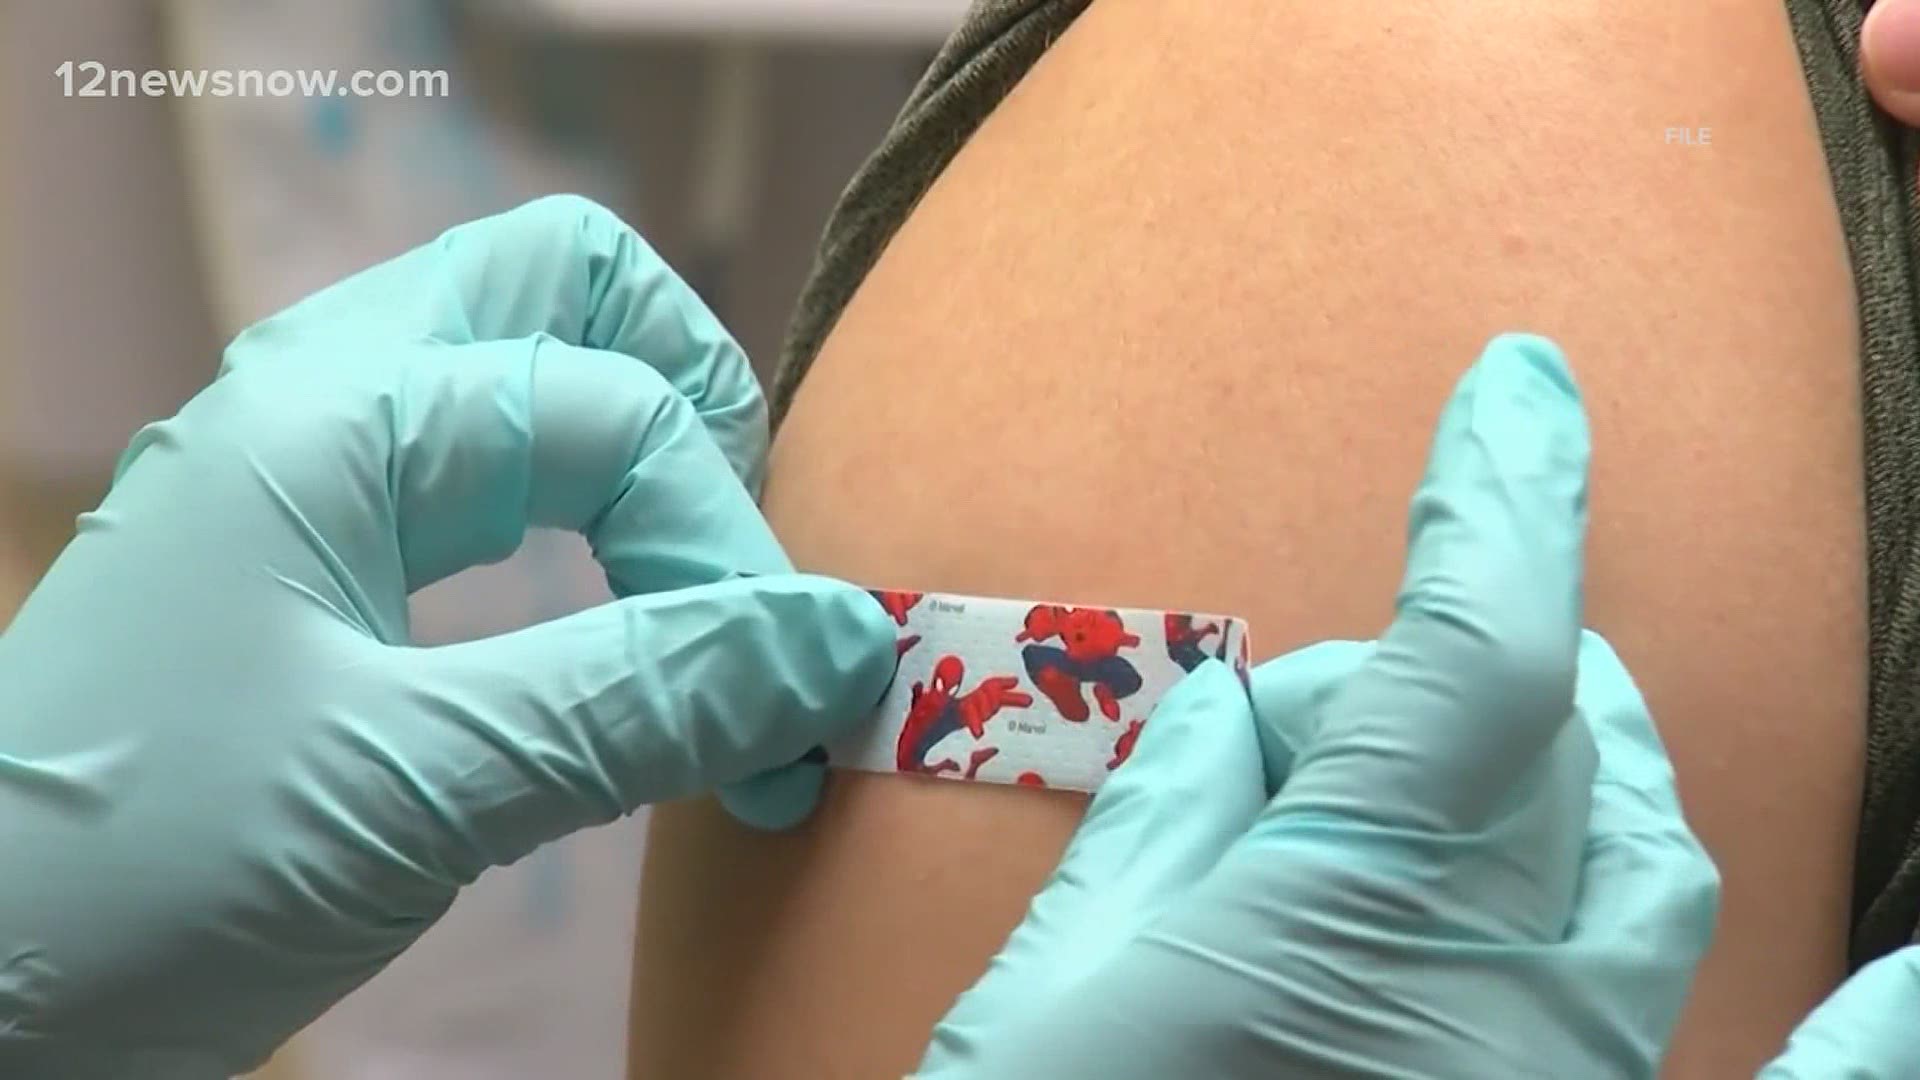 One Beaumont doctor said it's important to remember to continue social distancing and wearing masks as the race for a vaccine continues